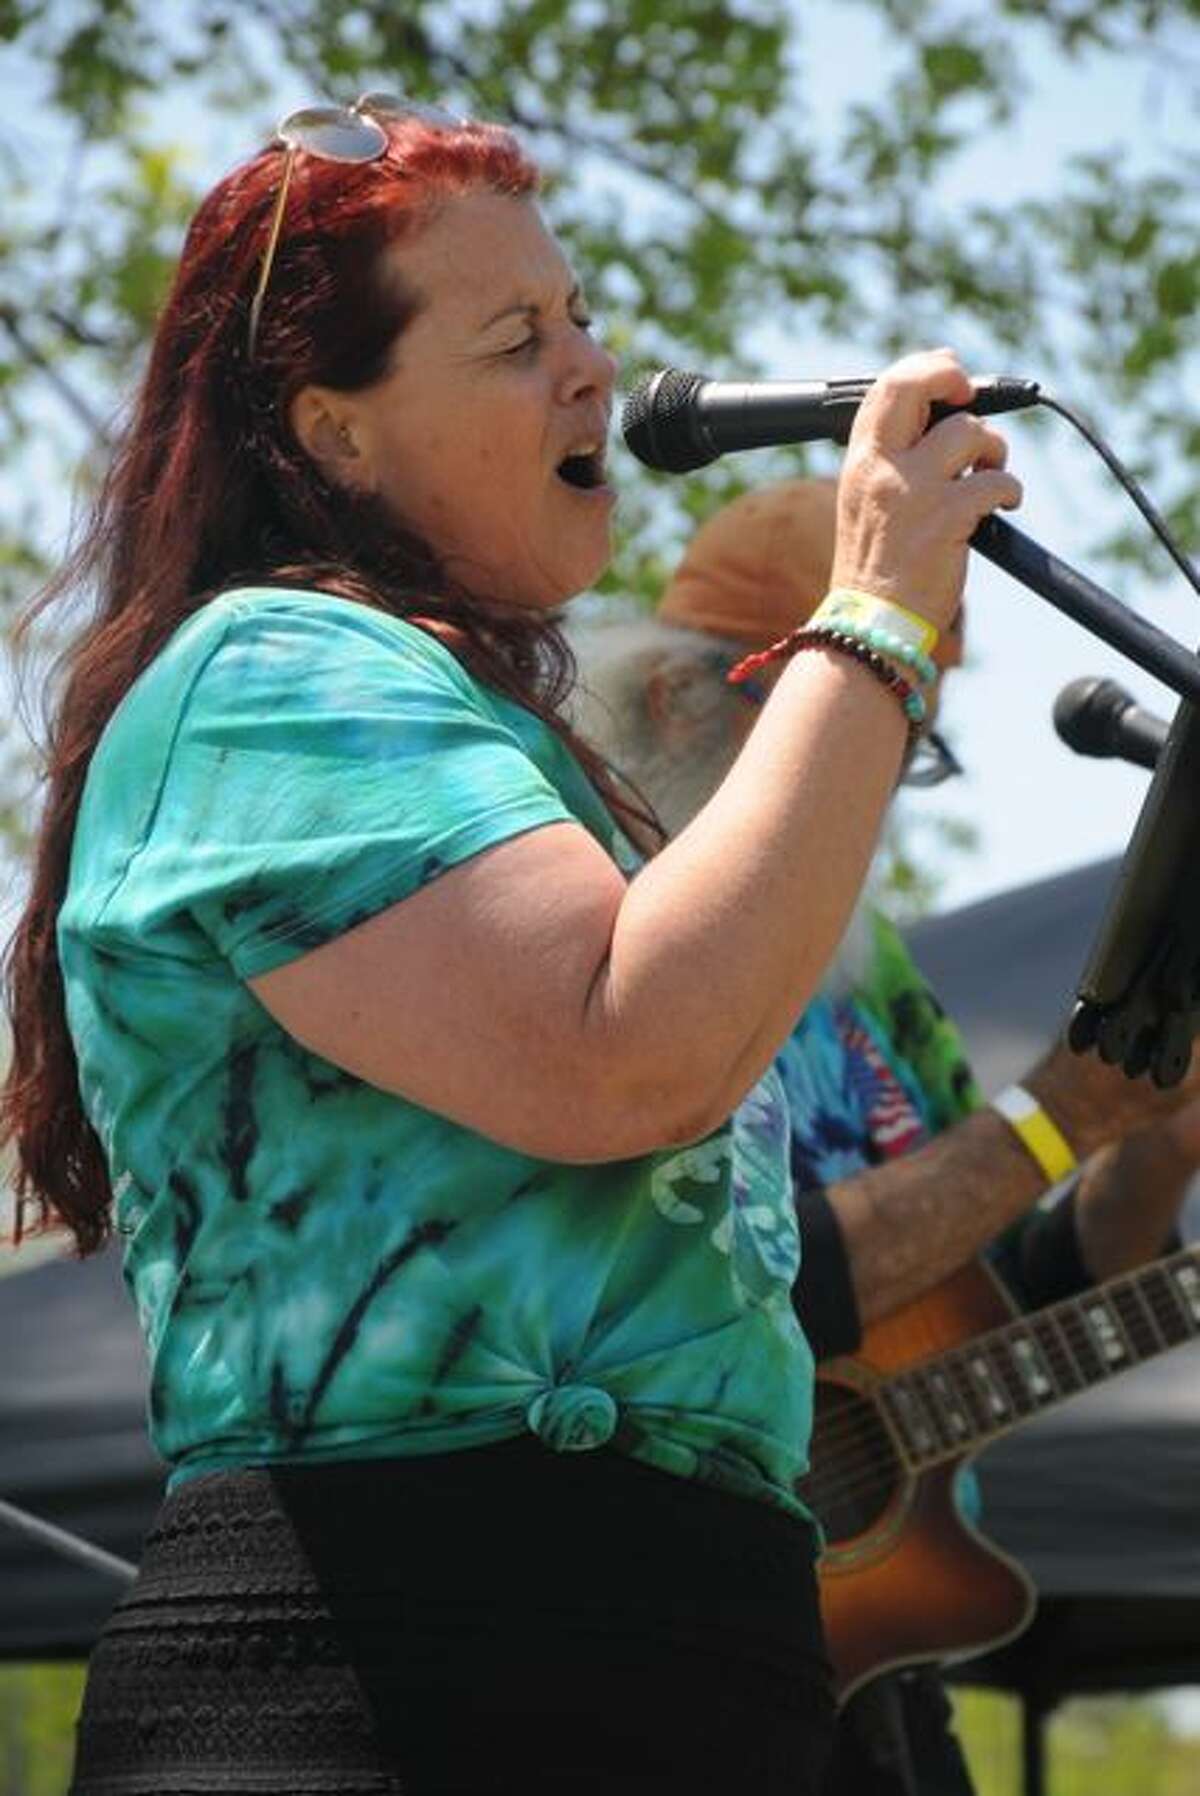 A singer belts out am Janis Joplin song during the Trinity River Festival in Cottage Hills on Saturday. More than 30 bands performed over two days for the fifth annual fundraiser begun in memory of 17-year-old Trinity Buel, who died in a 2018 auto accident. 